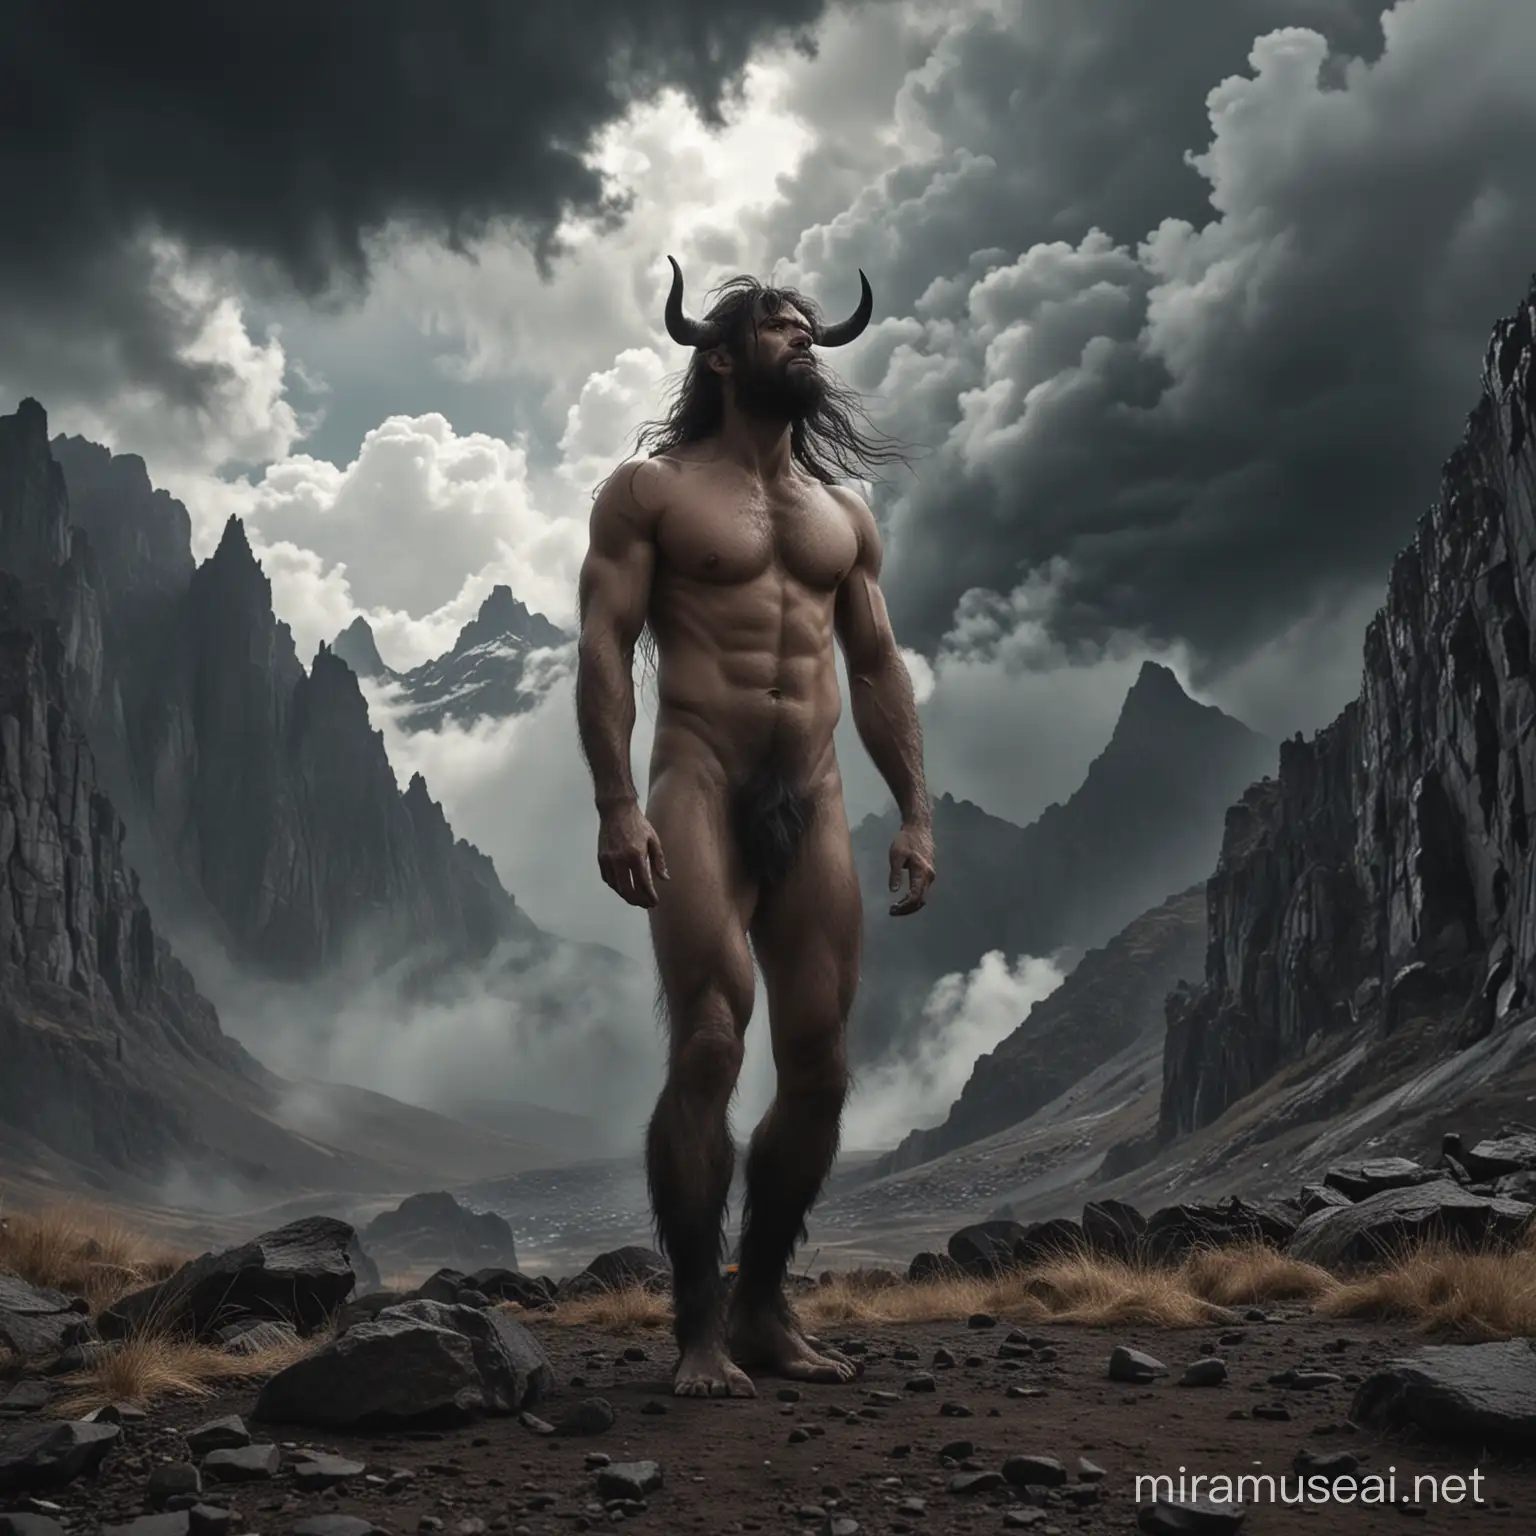 A humanoid creature,  hairy legs ending on hooves. Bare chest. Human face. Small horns over a long matted hair. He stares up in terror at a menacing black cloud. Mountain side setting , low-angle shot